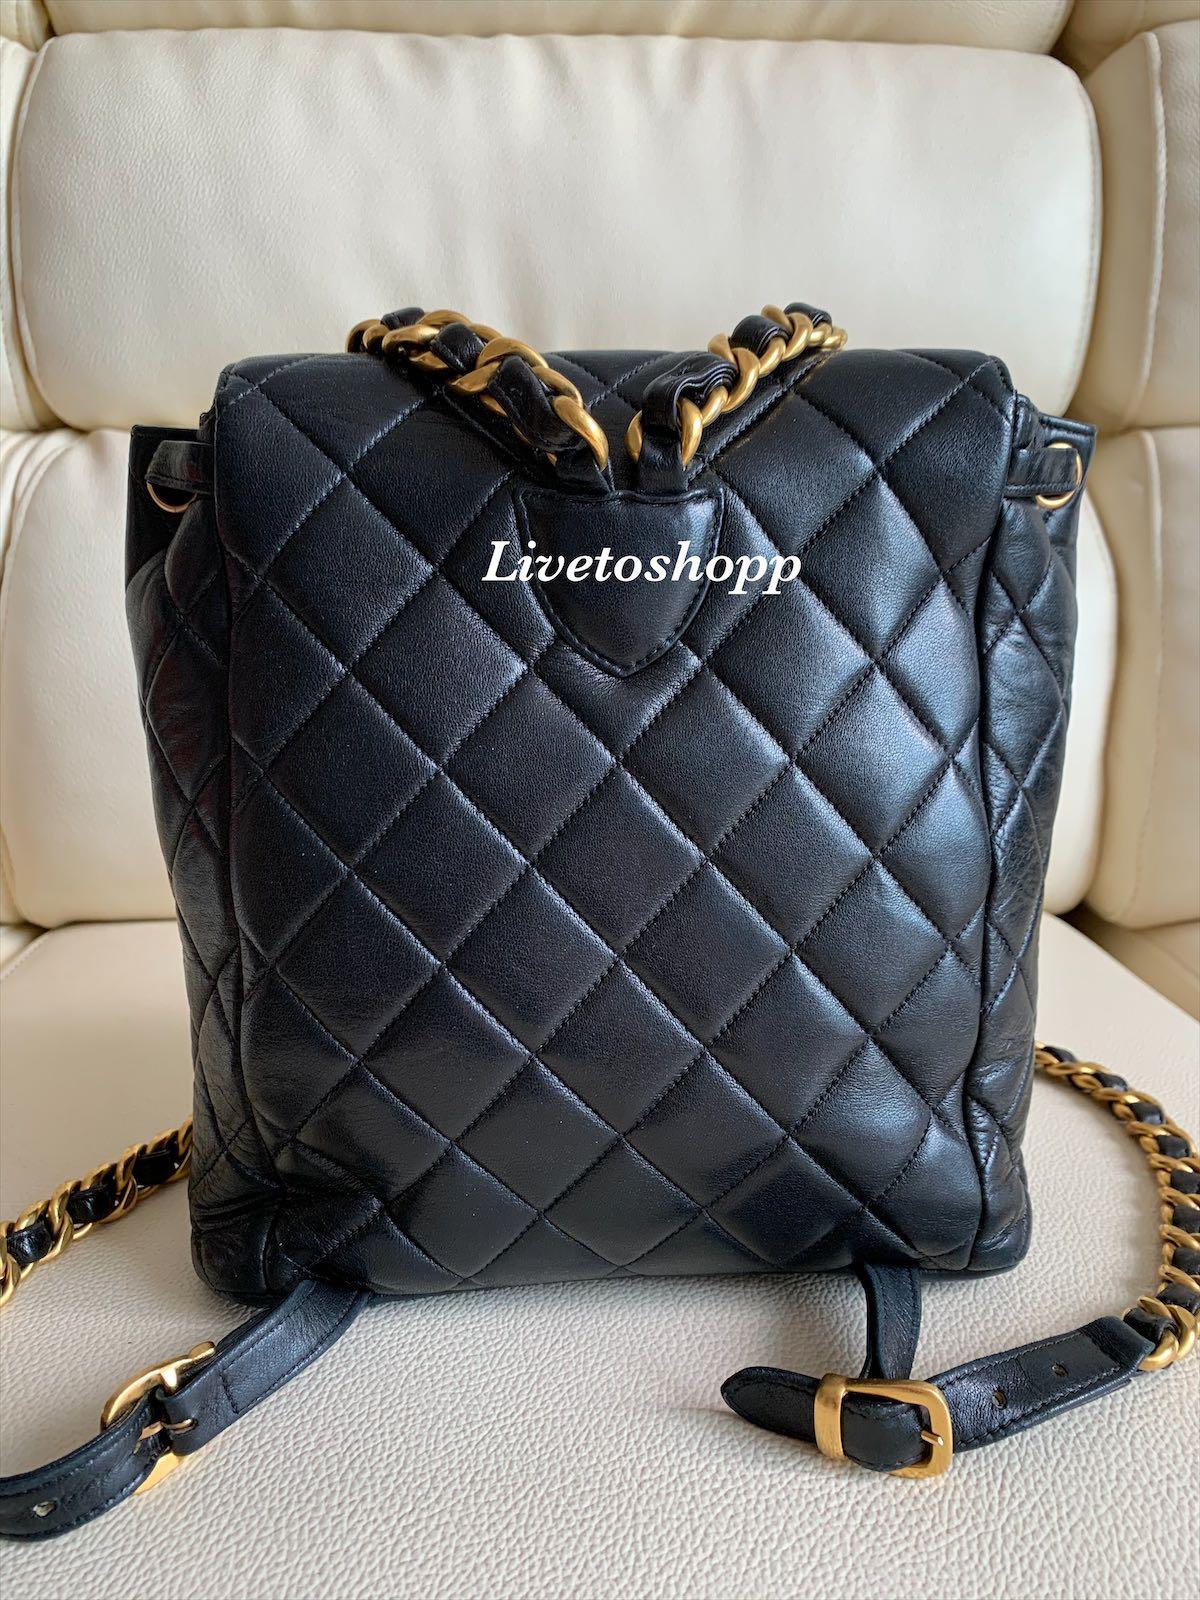 Chanel Vintage Duma backpack, Luxury, Bags & Wallets on Carousell